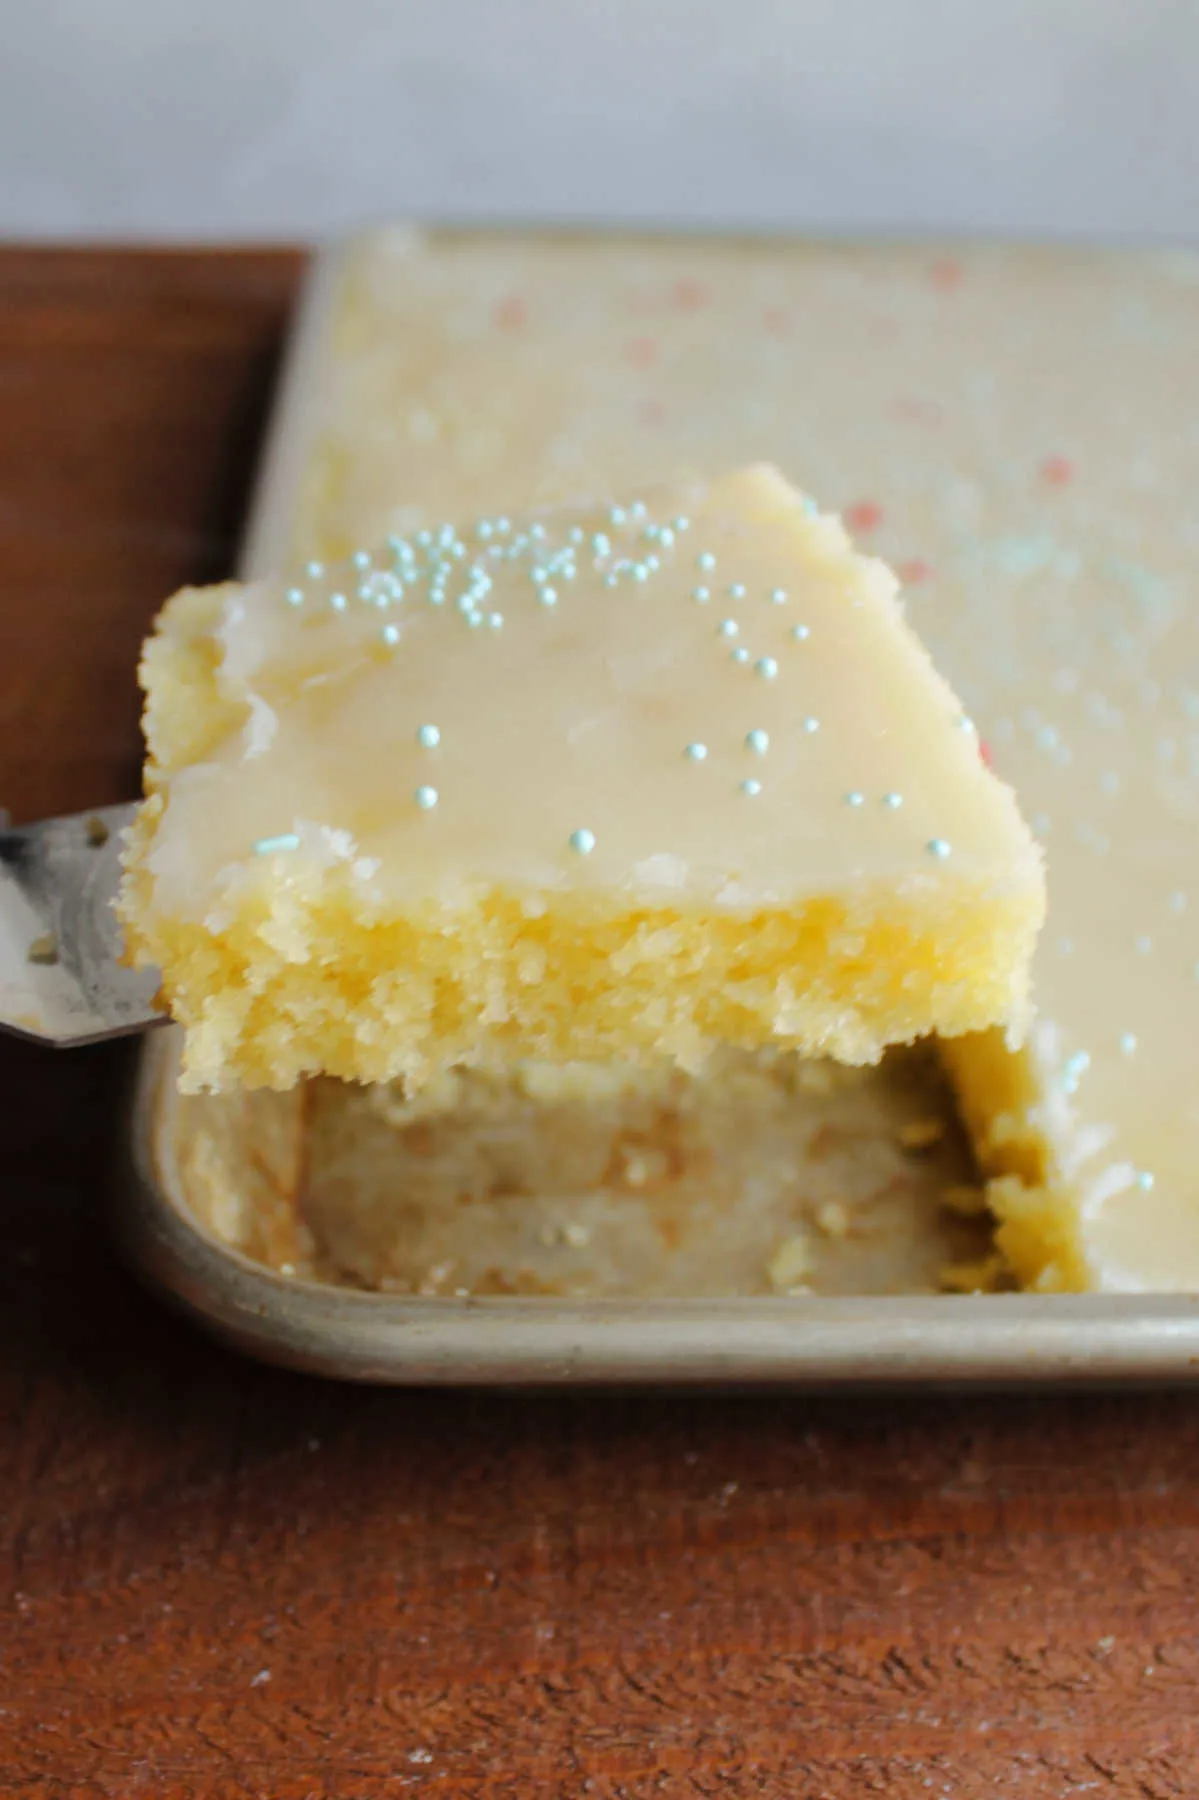 Lifting first slice of lemon Texas sheet cake out of pan showing soft texture.